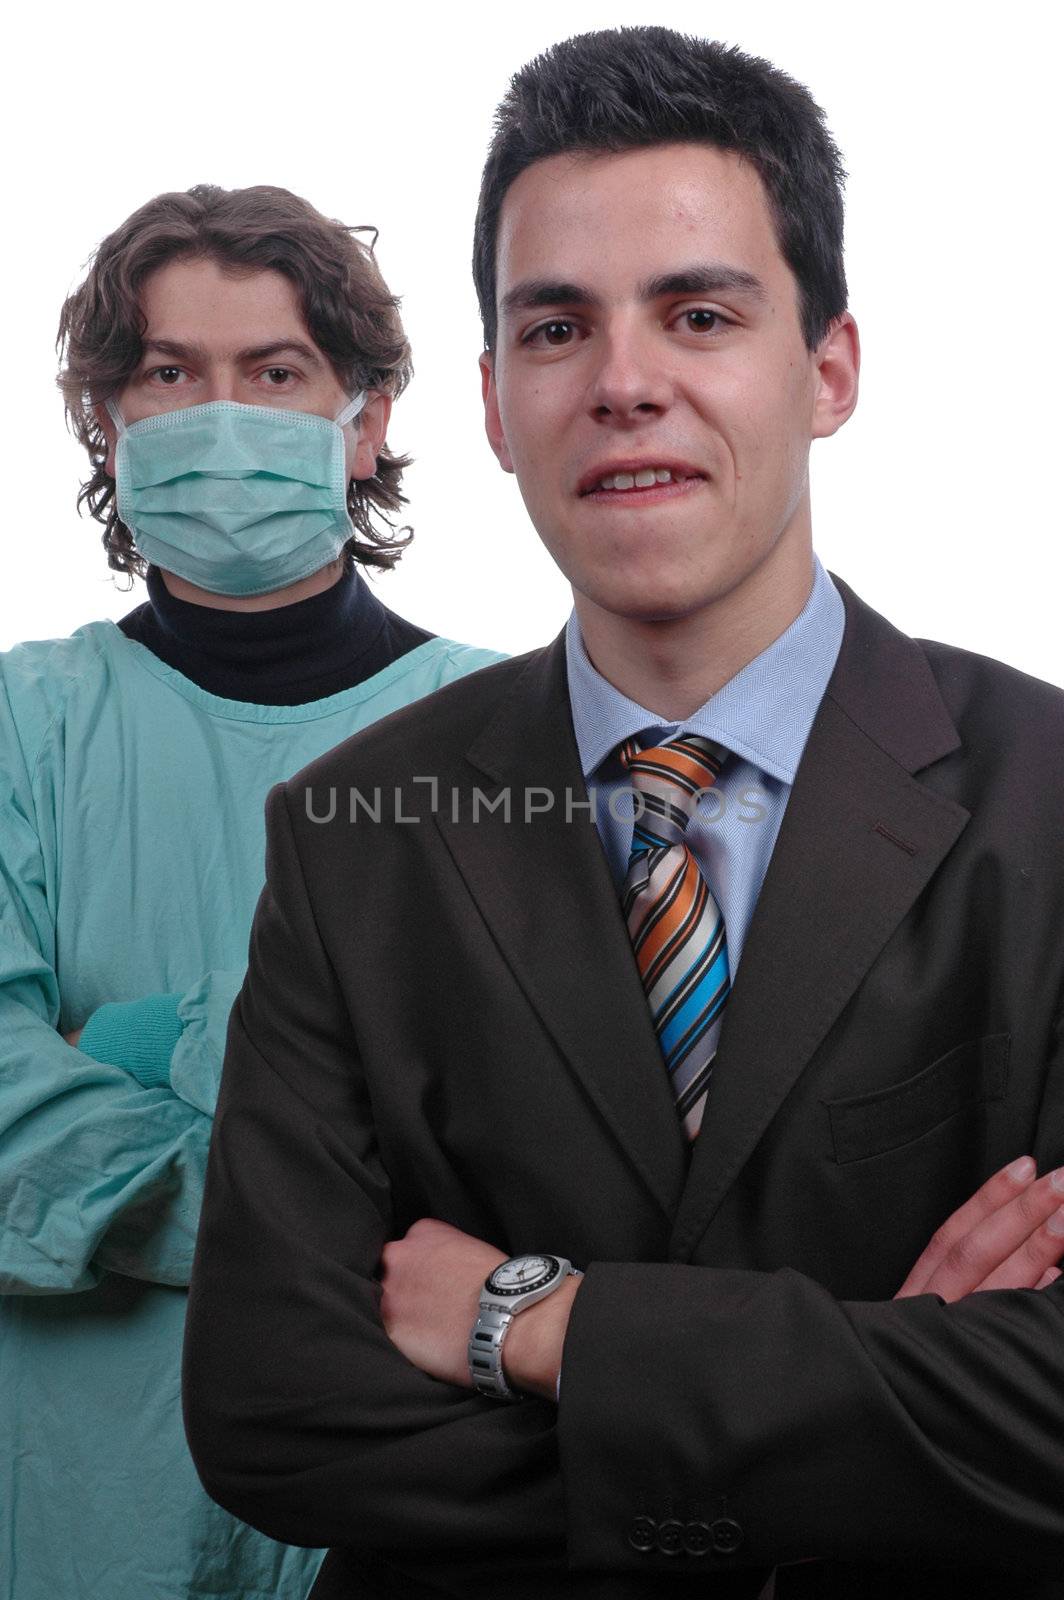 young doctor and businessman portrait over white background by raalves